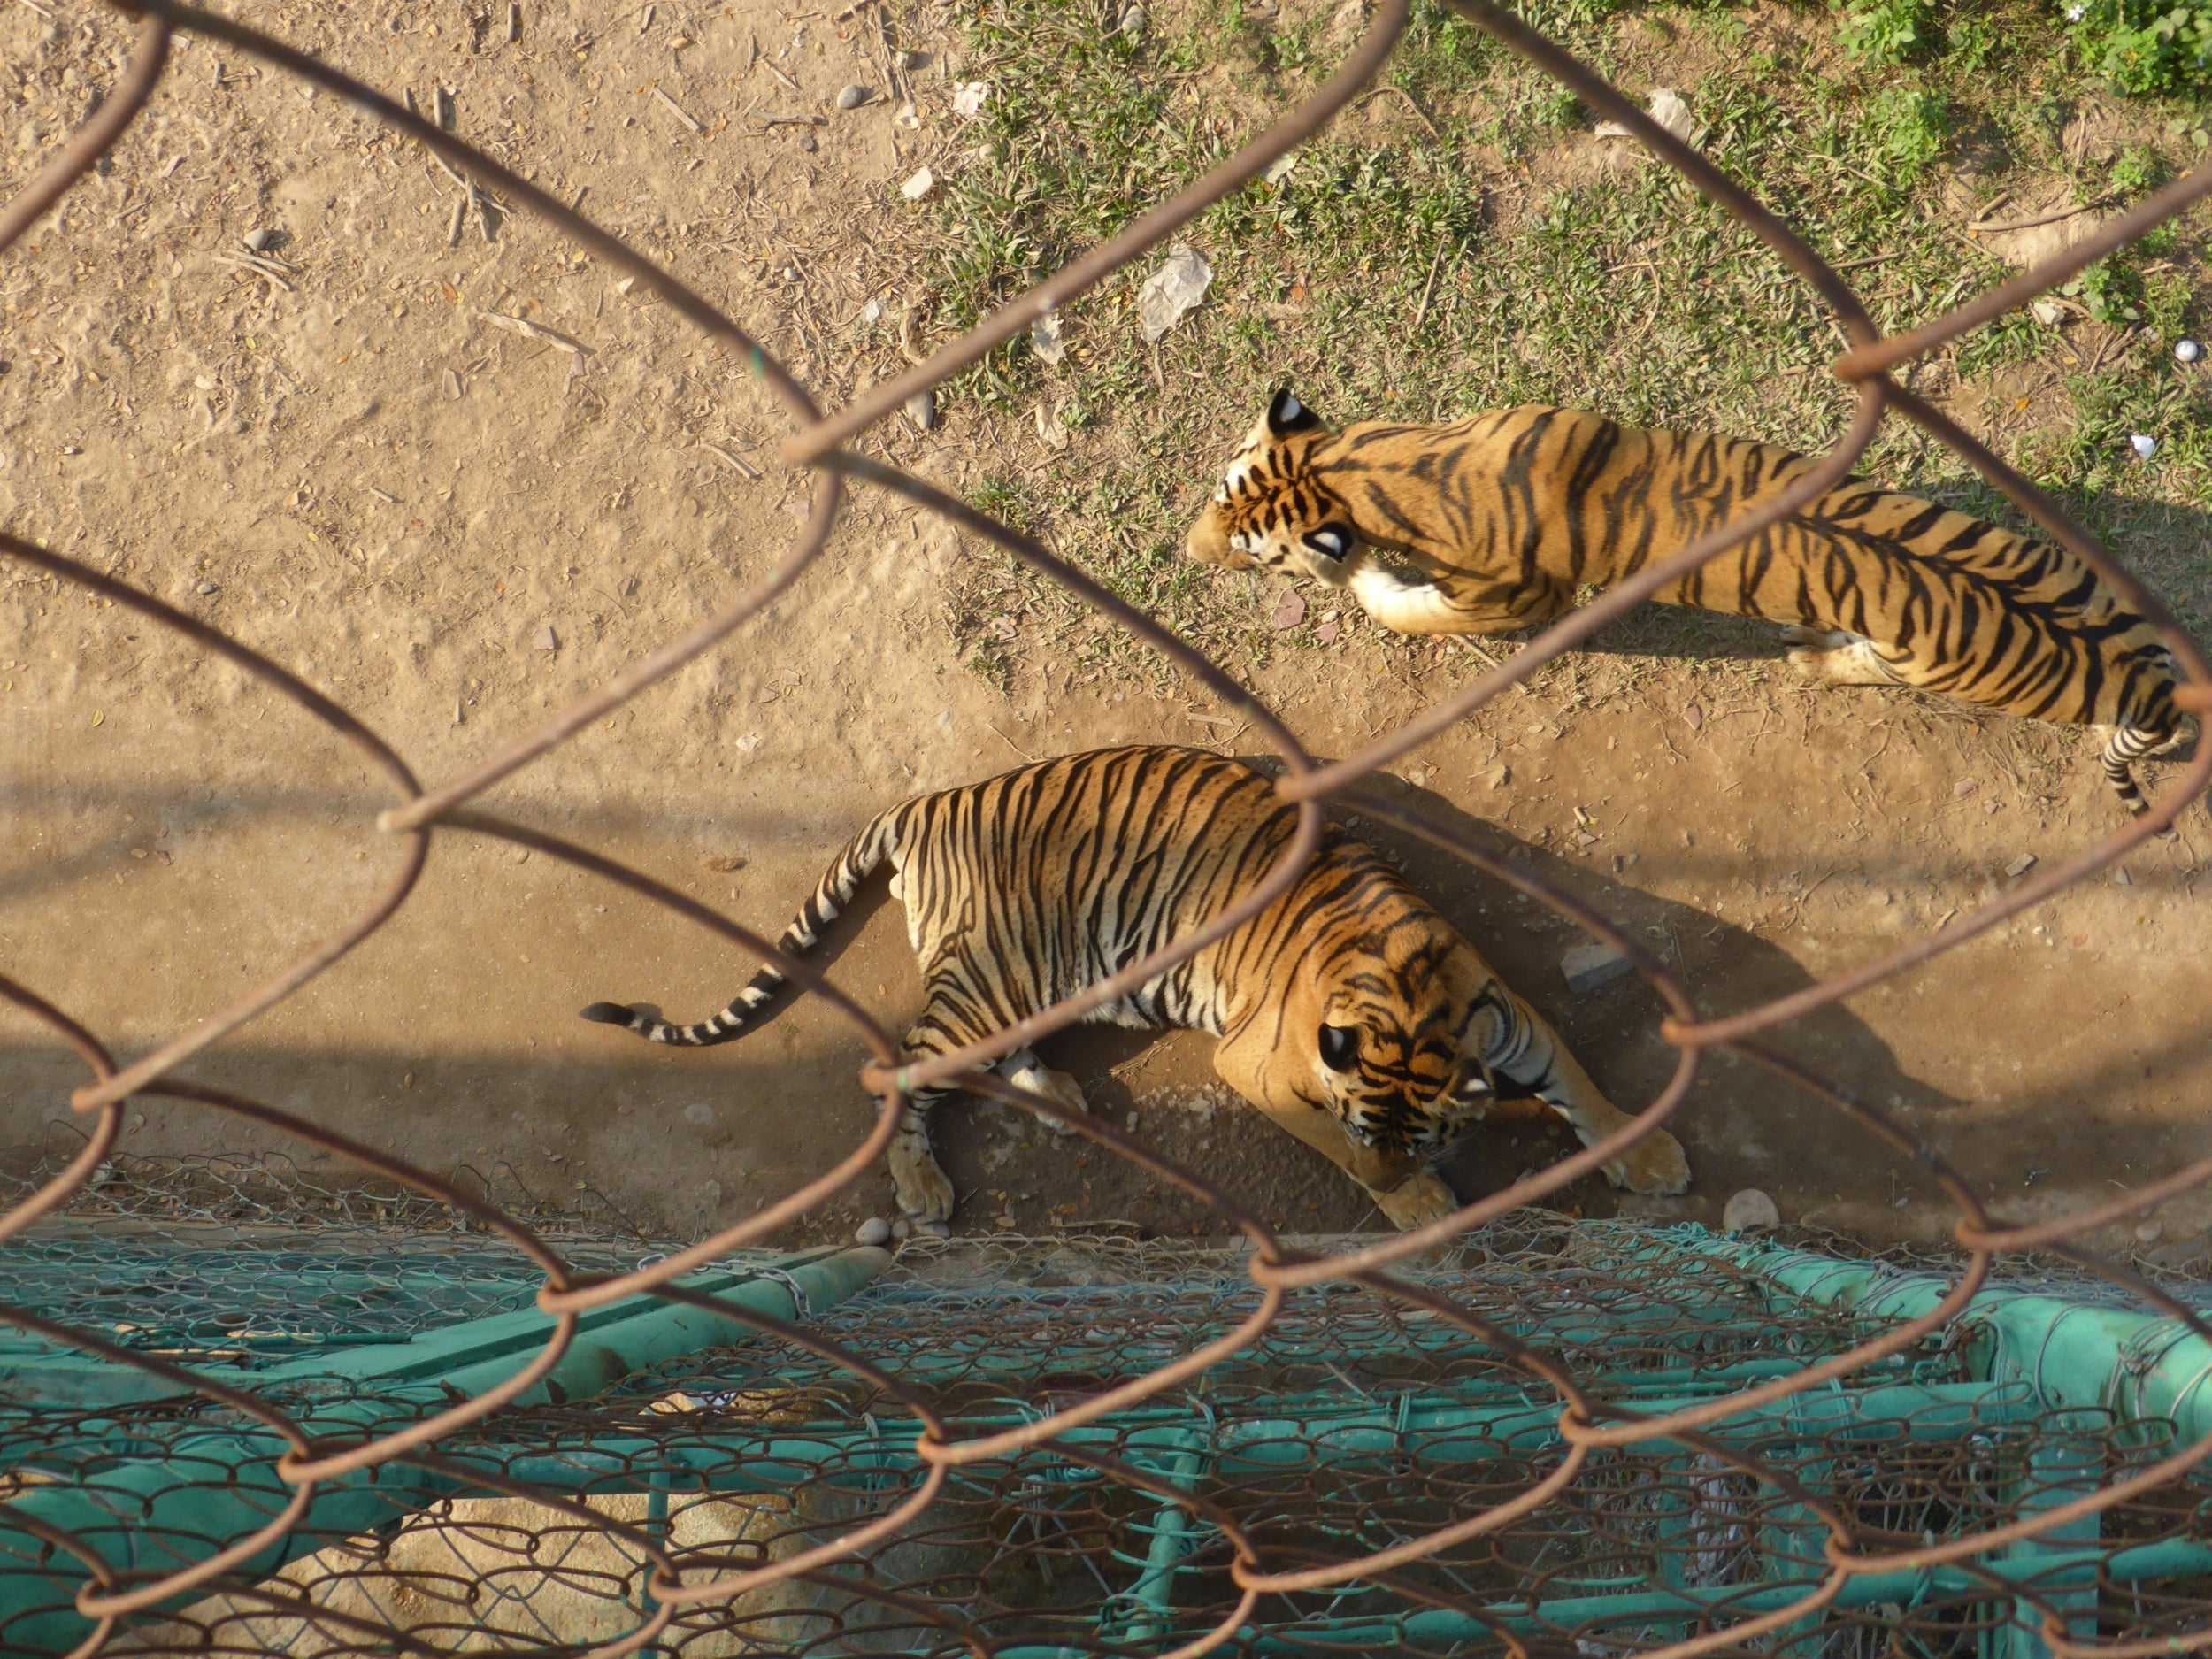 Tigers at Kings Romans complex in Laos